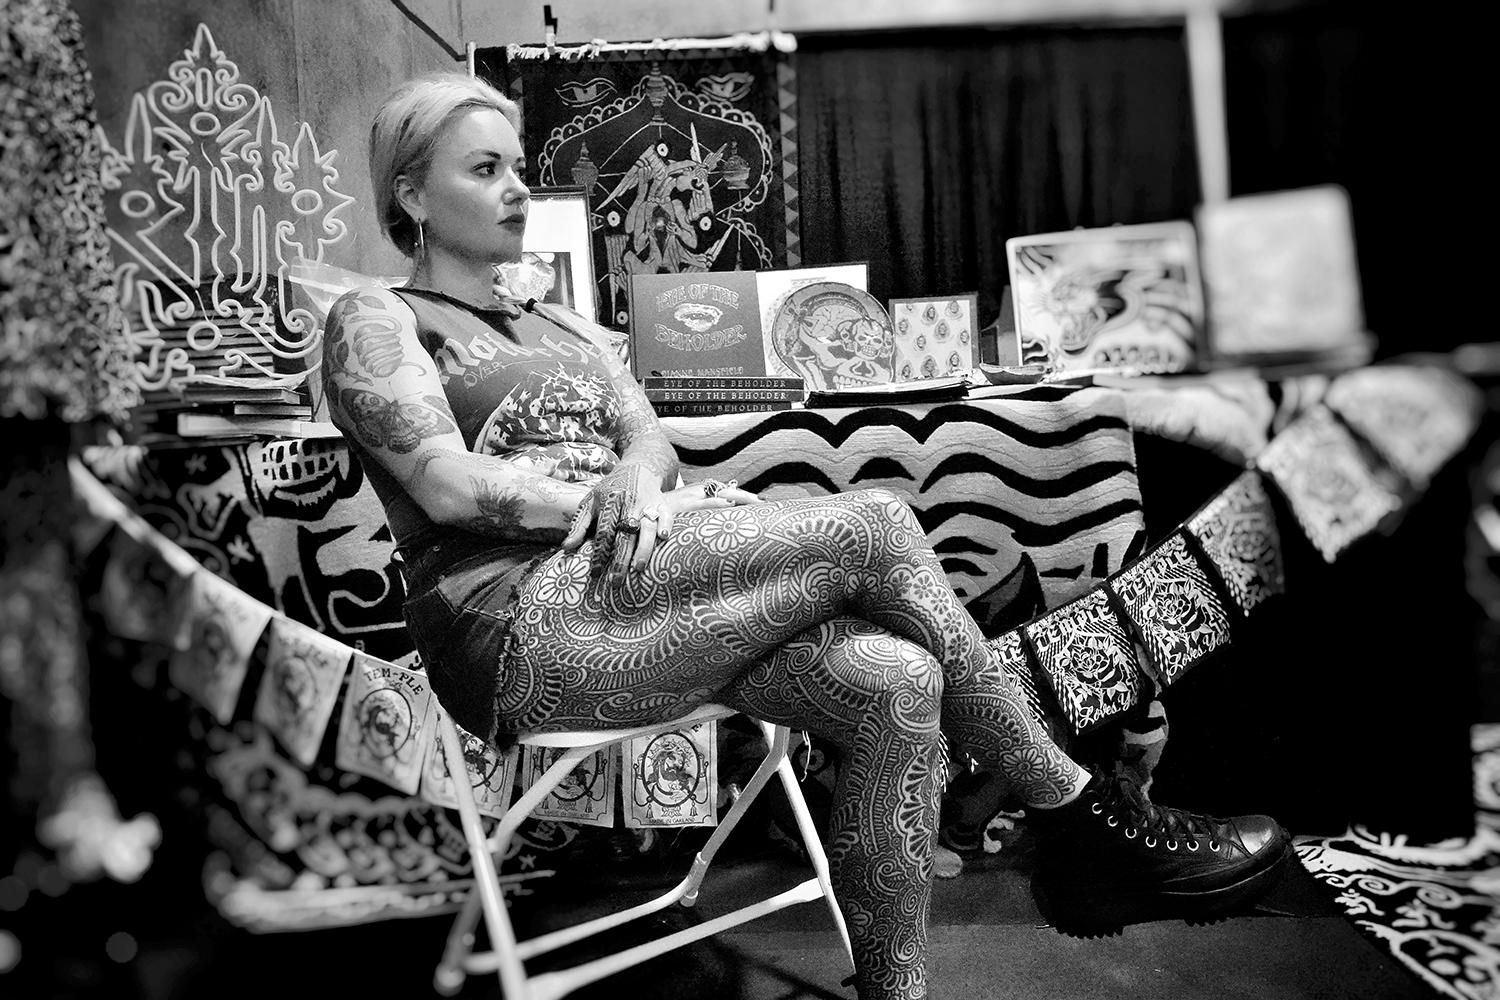 Taylor Bosworth, manager of Raking Light Gallery, with ornamental tattoos on her legs and hands by Guy Le